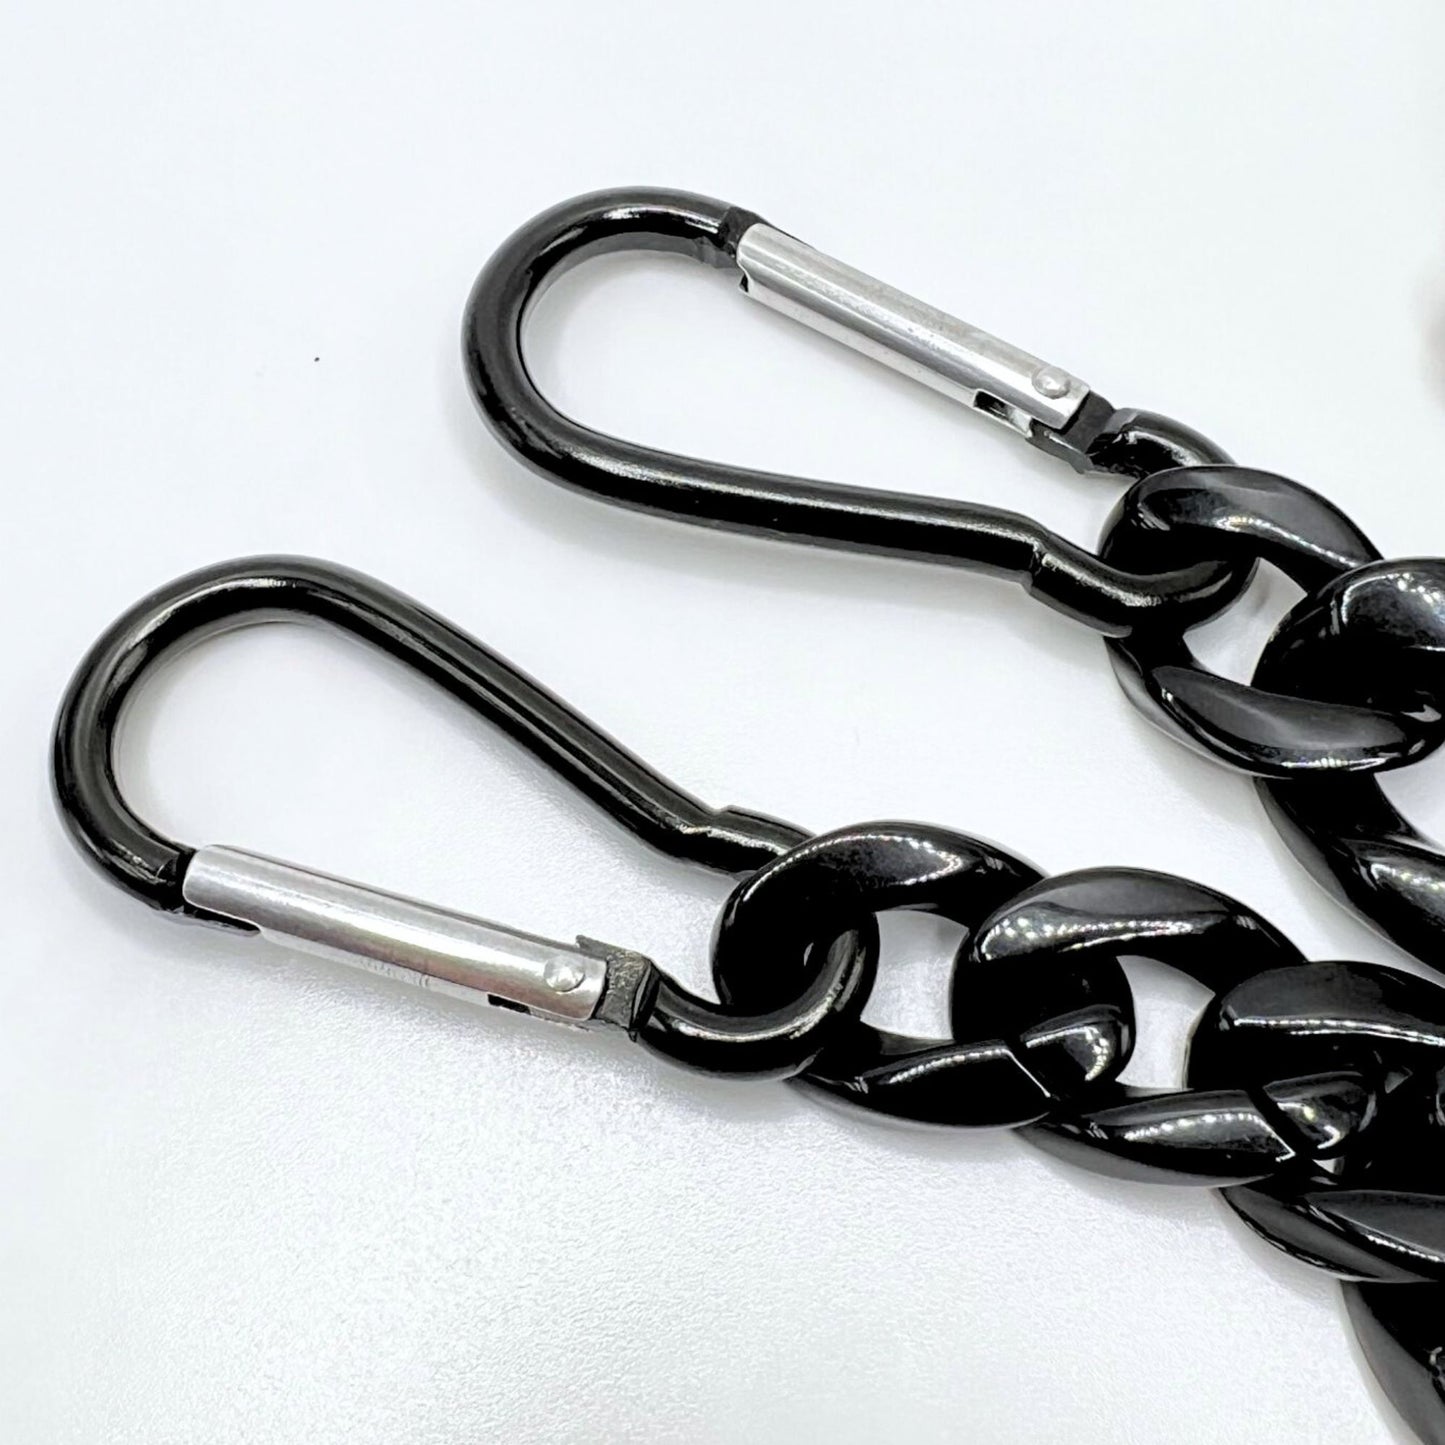 Handmade black acrylic chain with carabiner clips. Displayed on a table. Close up of the carabiners.